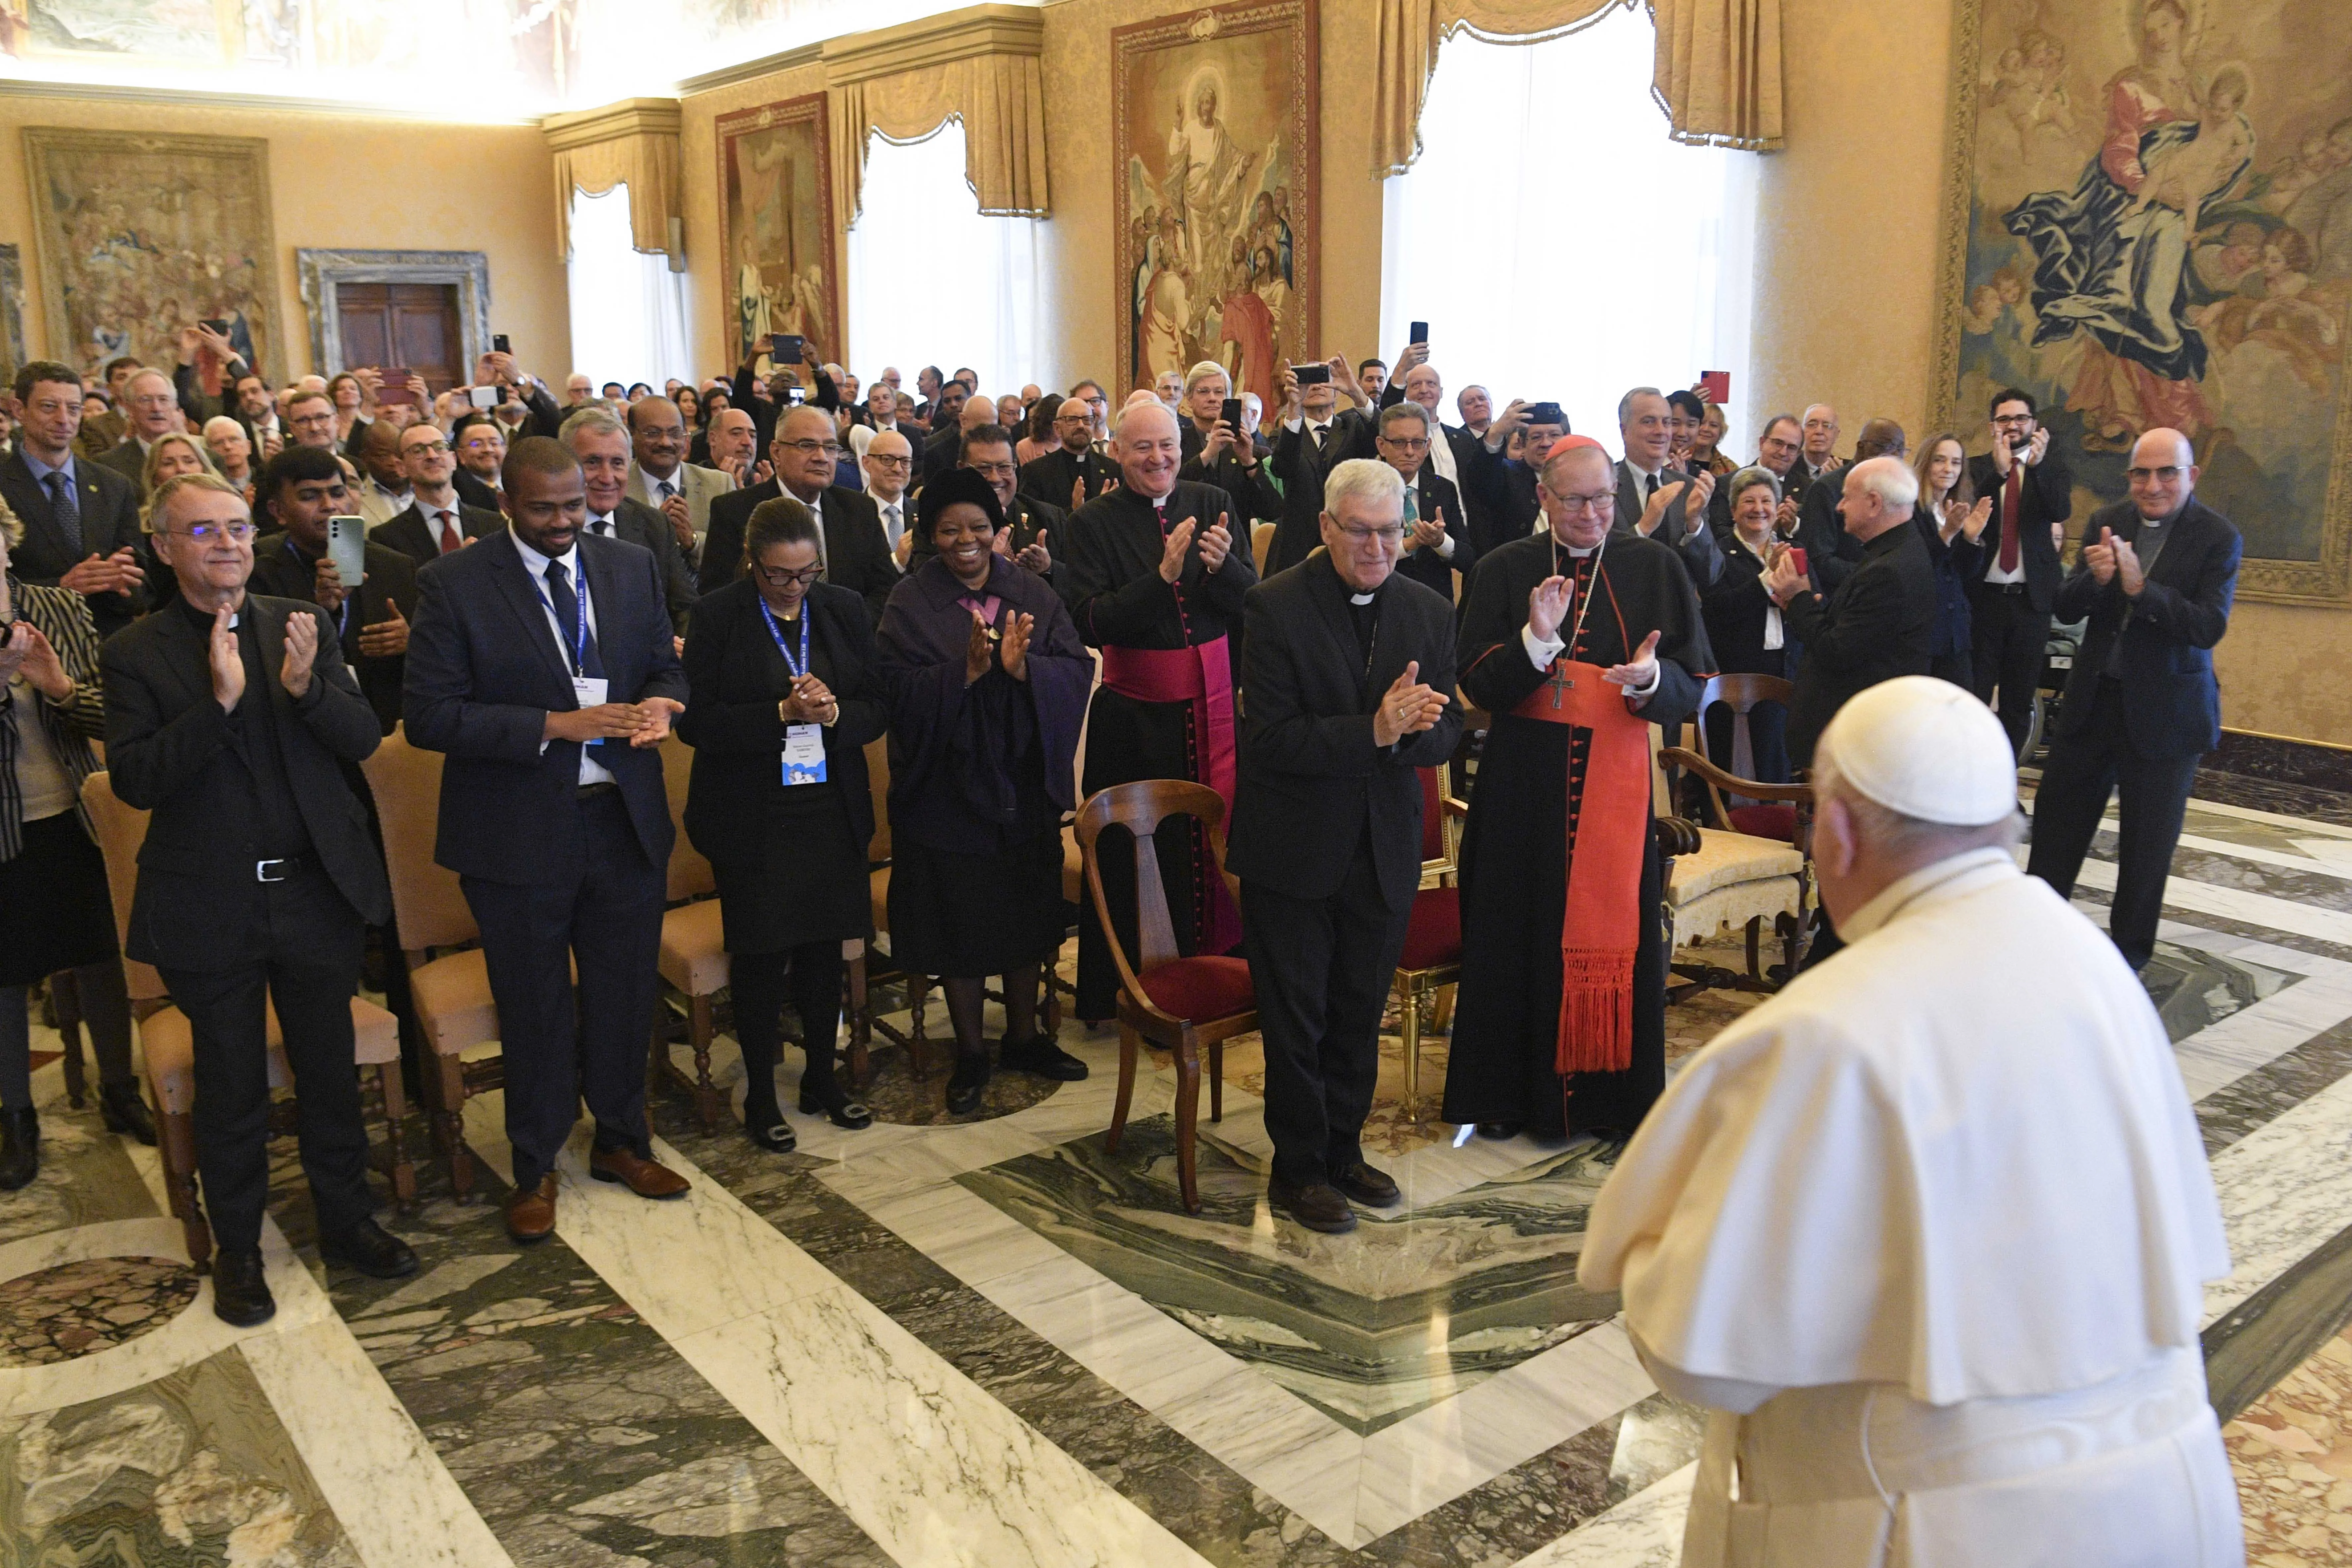 Pope Francis emphasizes the importance of technological development in promoting human well-being